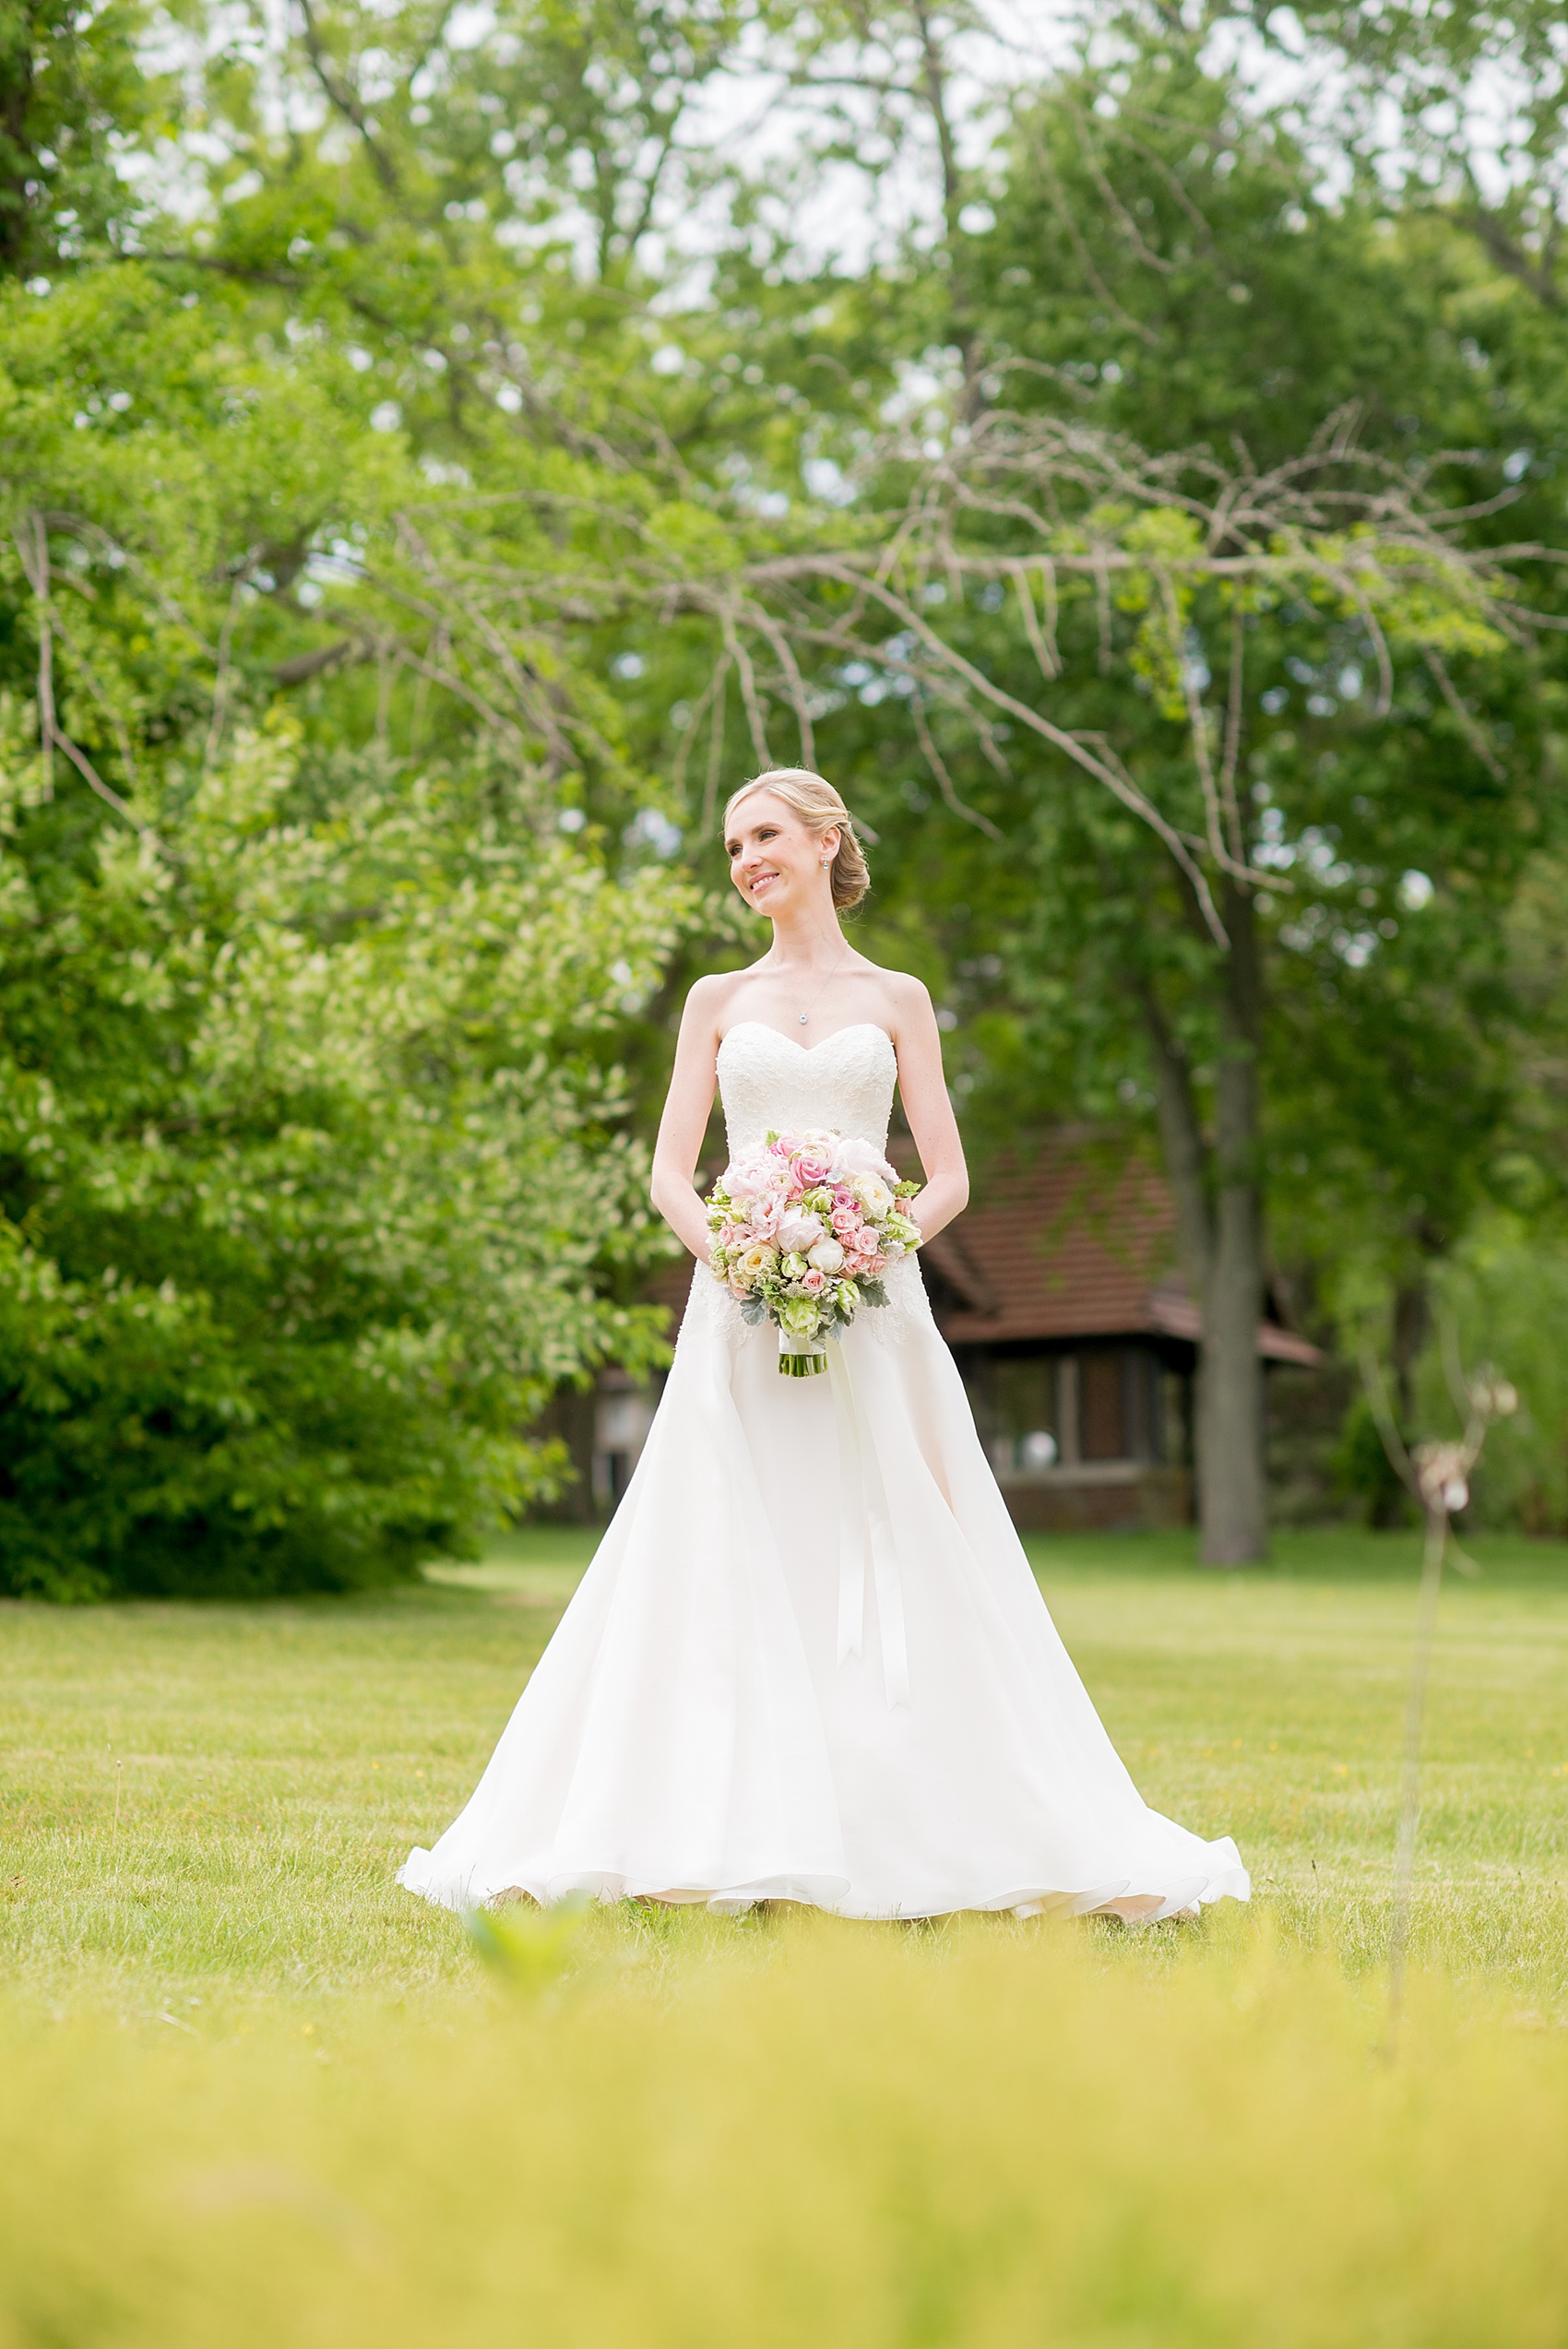 Waveny House wedding photos in Connecticut by Mikkel Paige Photography. Picture of the bride in a strapless wedding gown with pink and green bouquet.